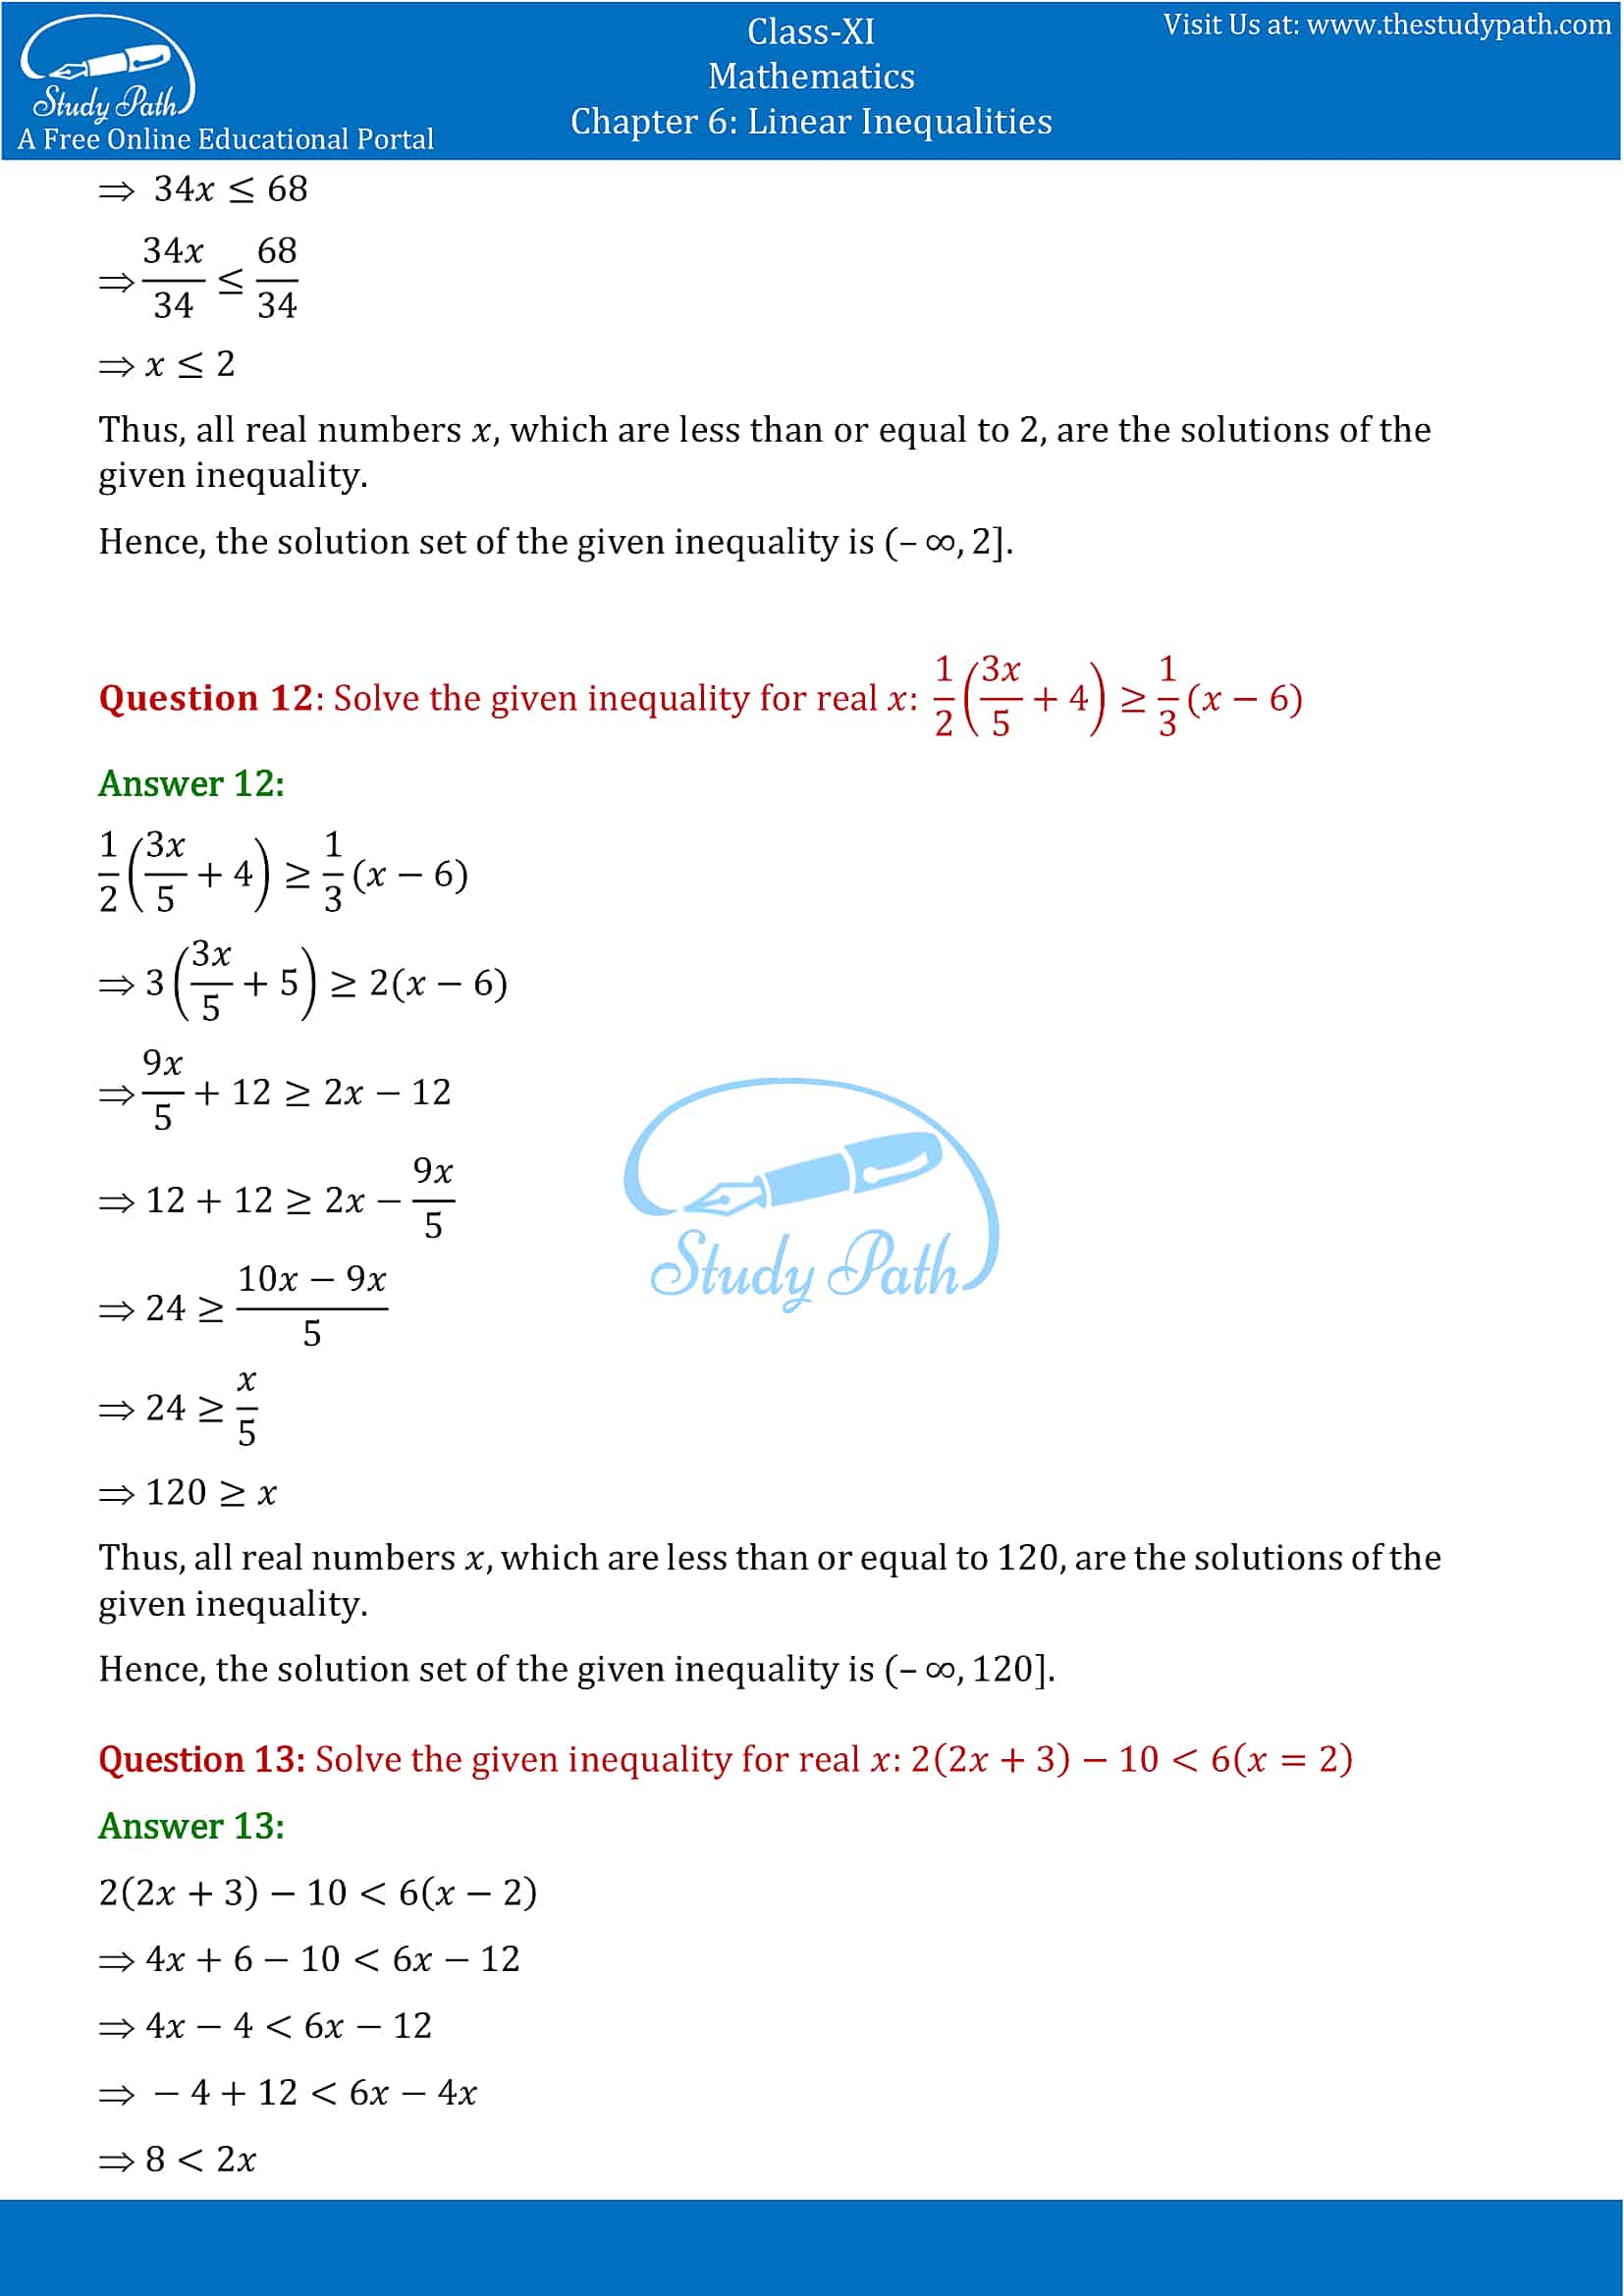 NCERT Solutions for Class 11 Maths chapter 6 Linear Inequalities Exercise 6.1 Part-6